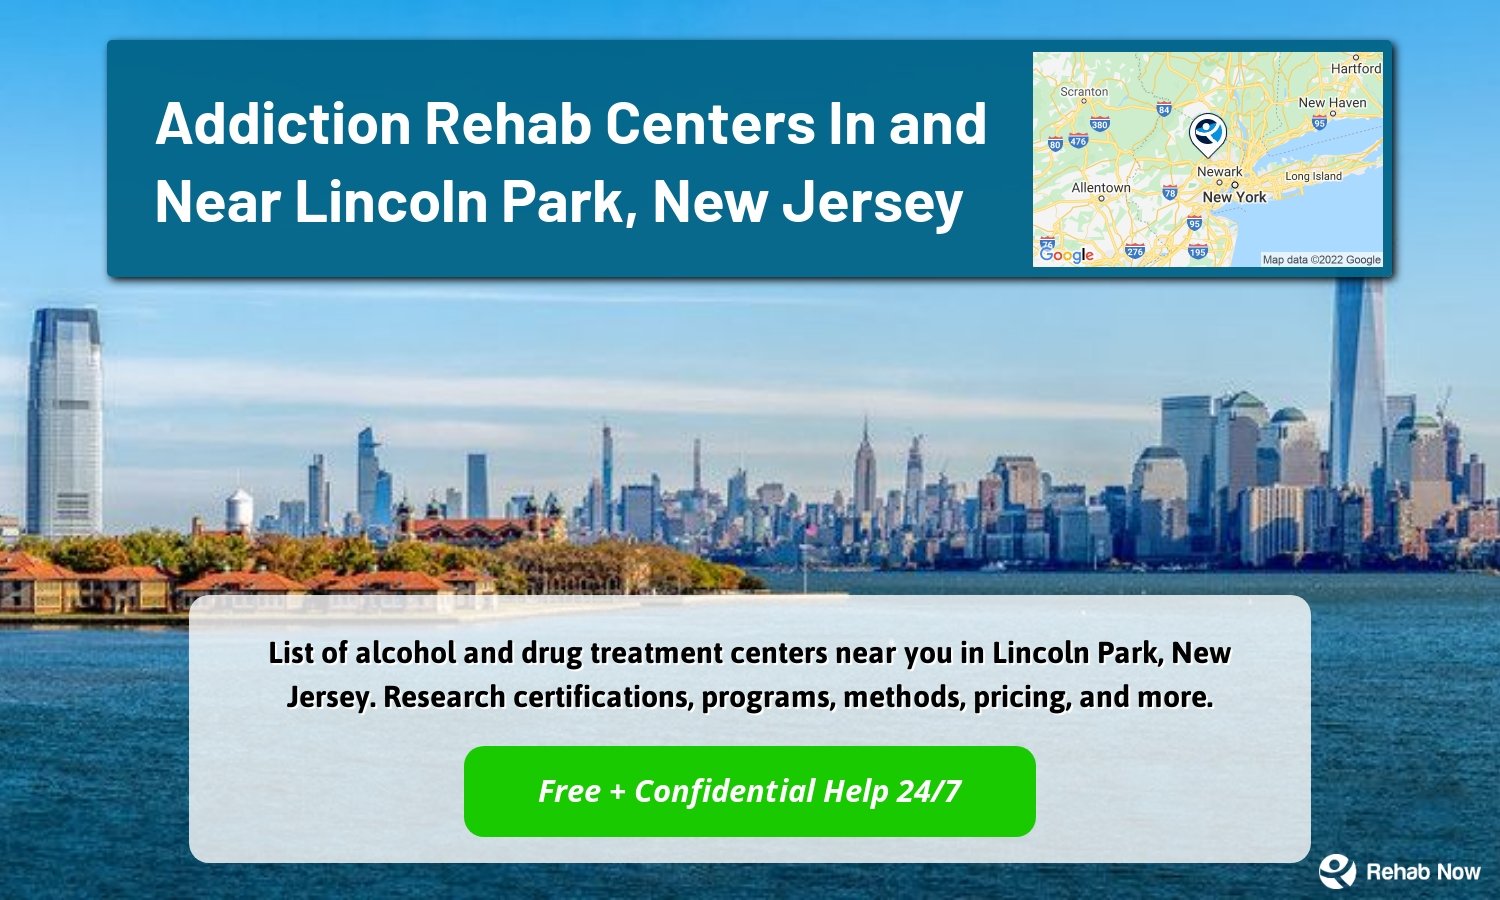 List of alcohol and drug treatment centers near you in Lincoln Park, New Jersey. Research certifications, programs, methods, pricing, and more.